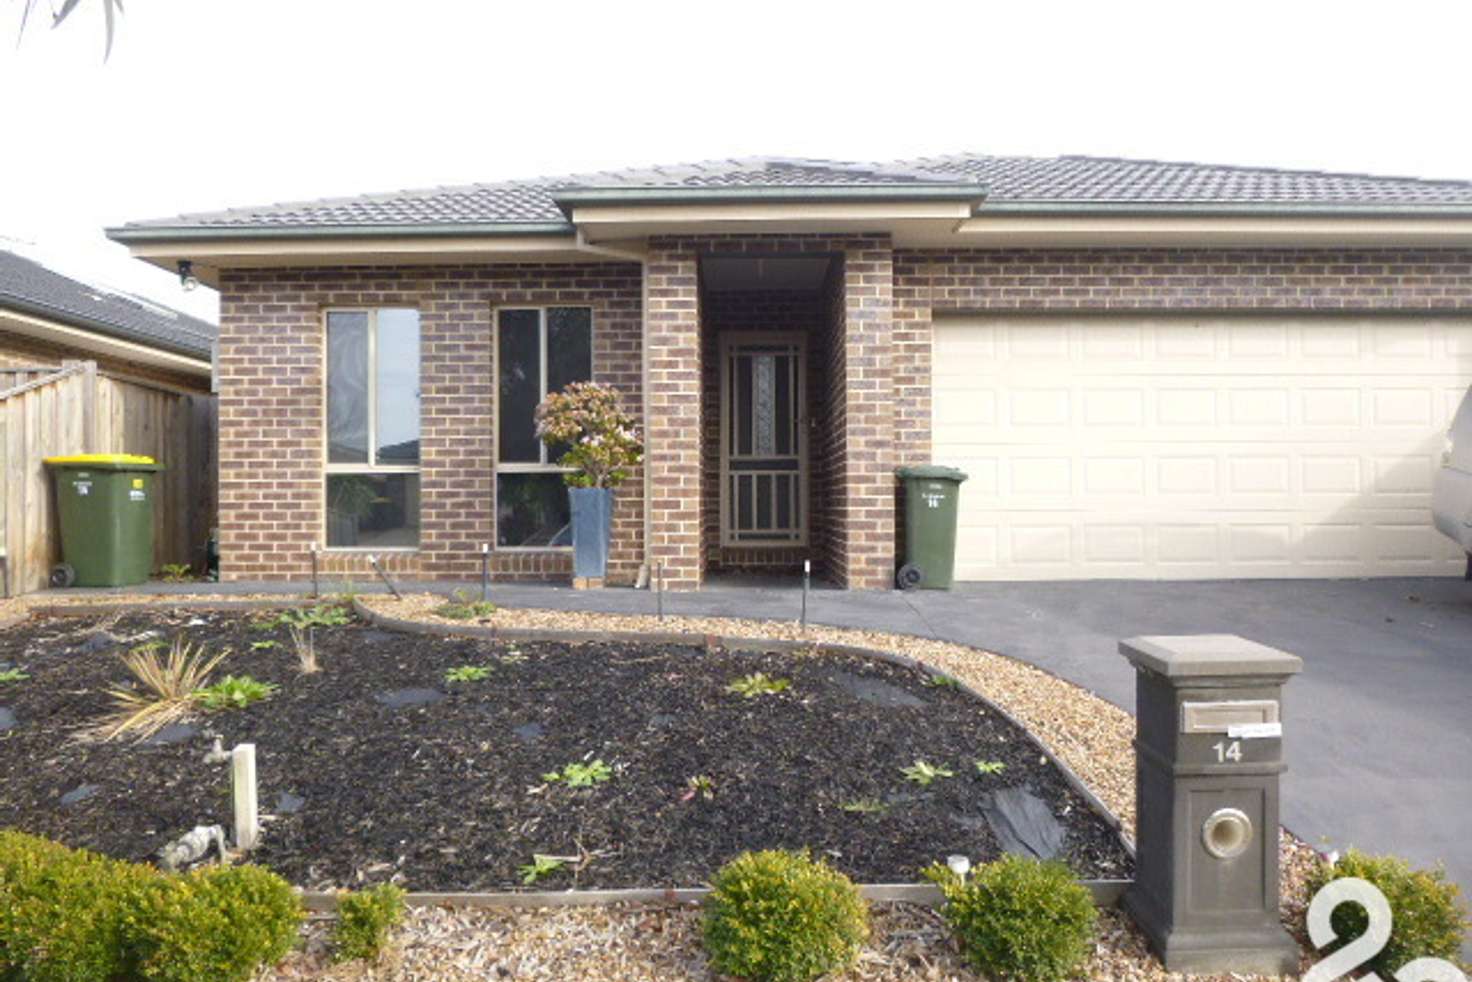 Main view of Homely house listing, 14 Treehaven Way, Doreen VIC 3754